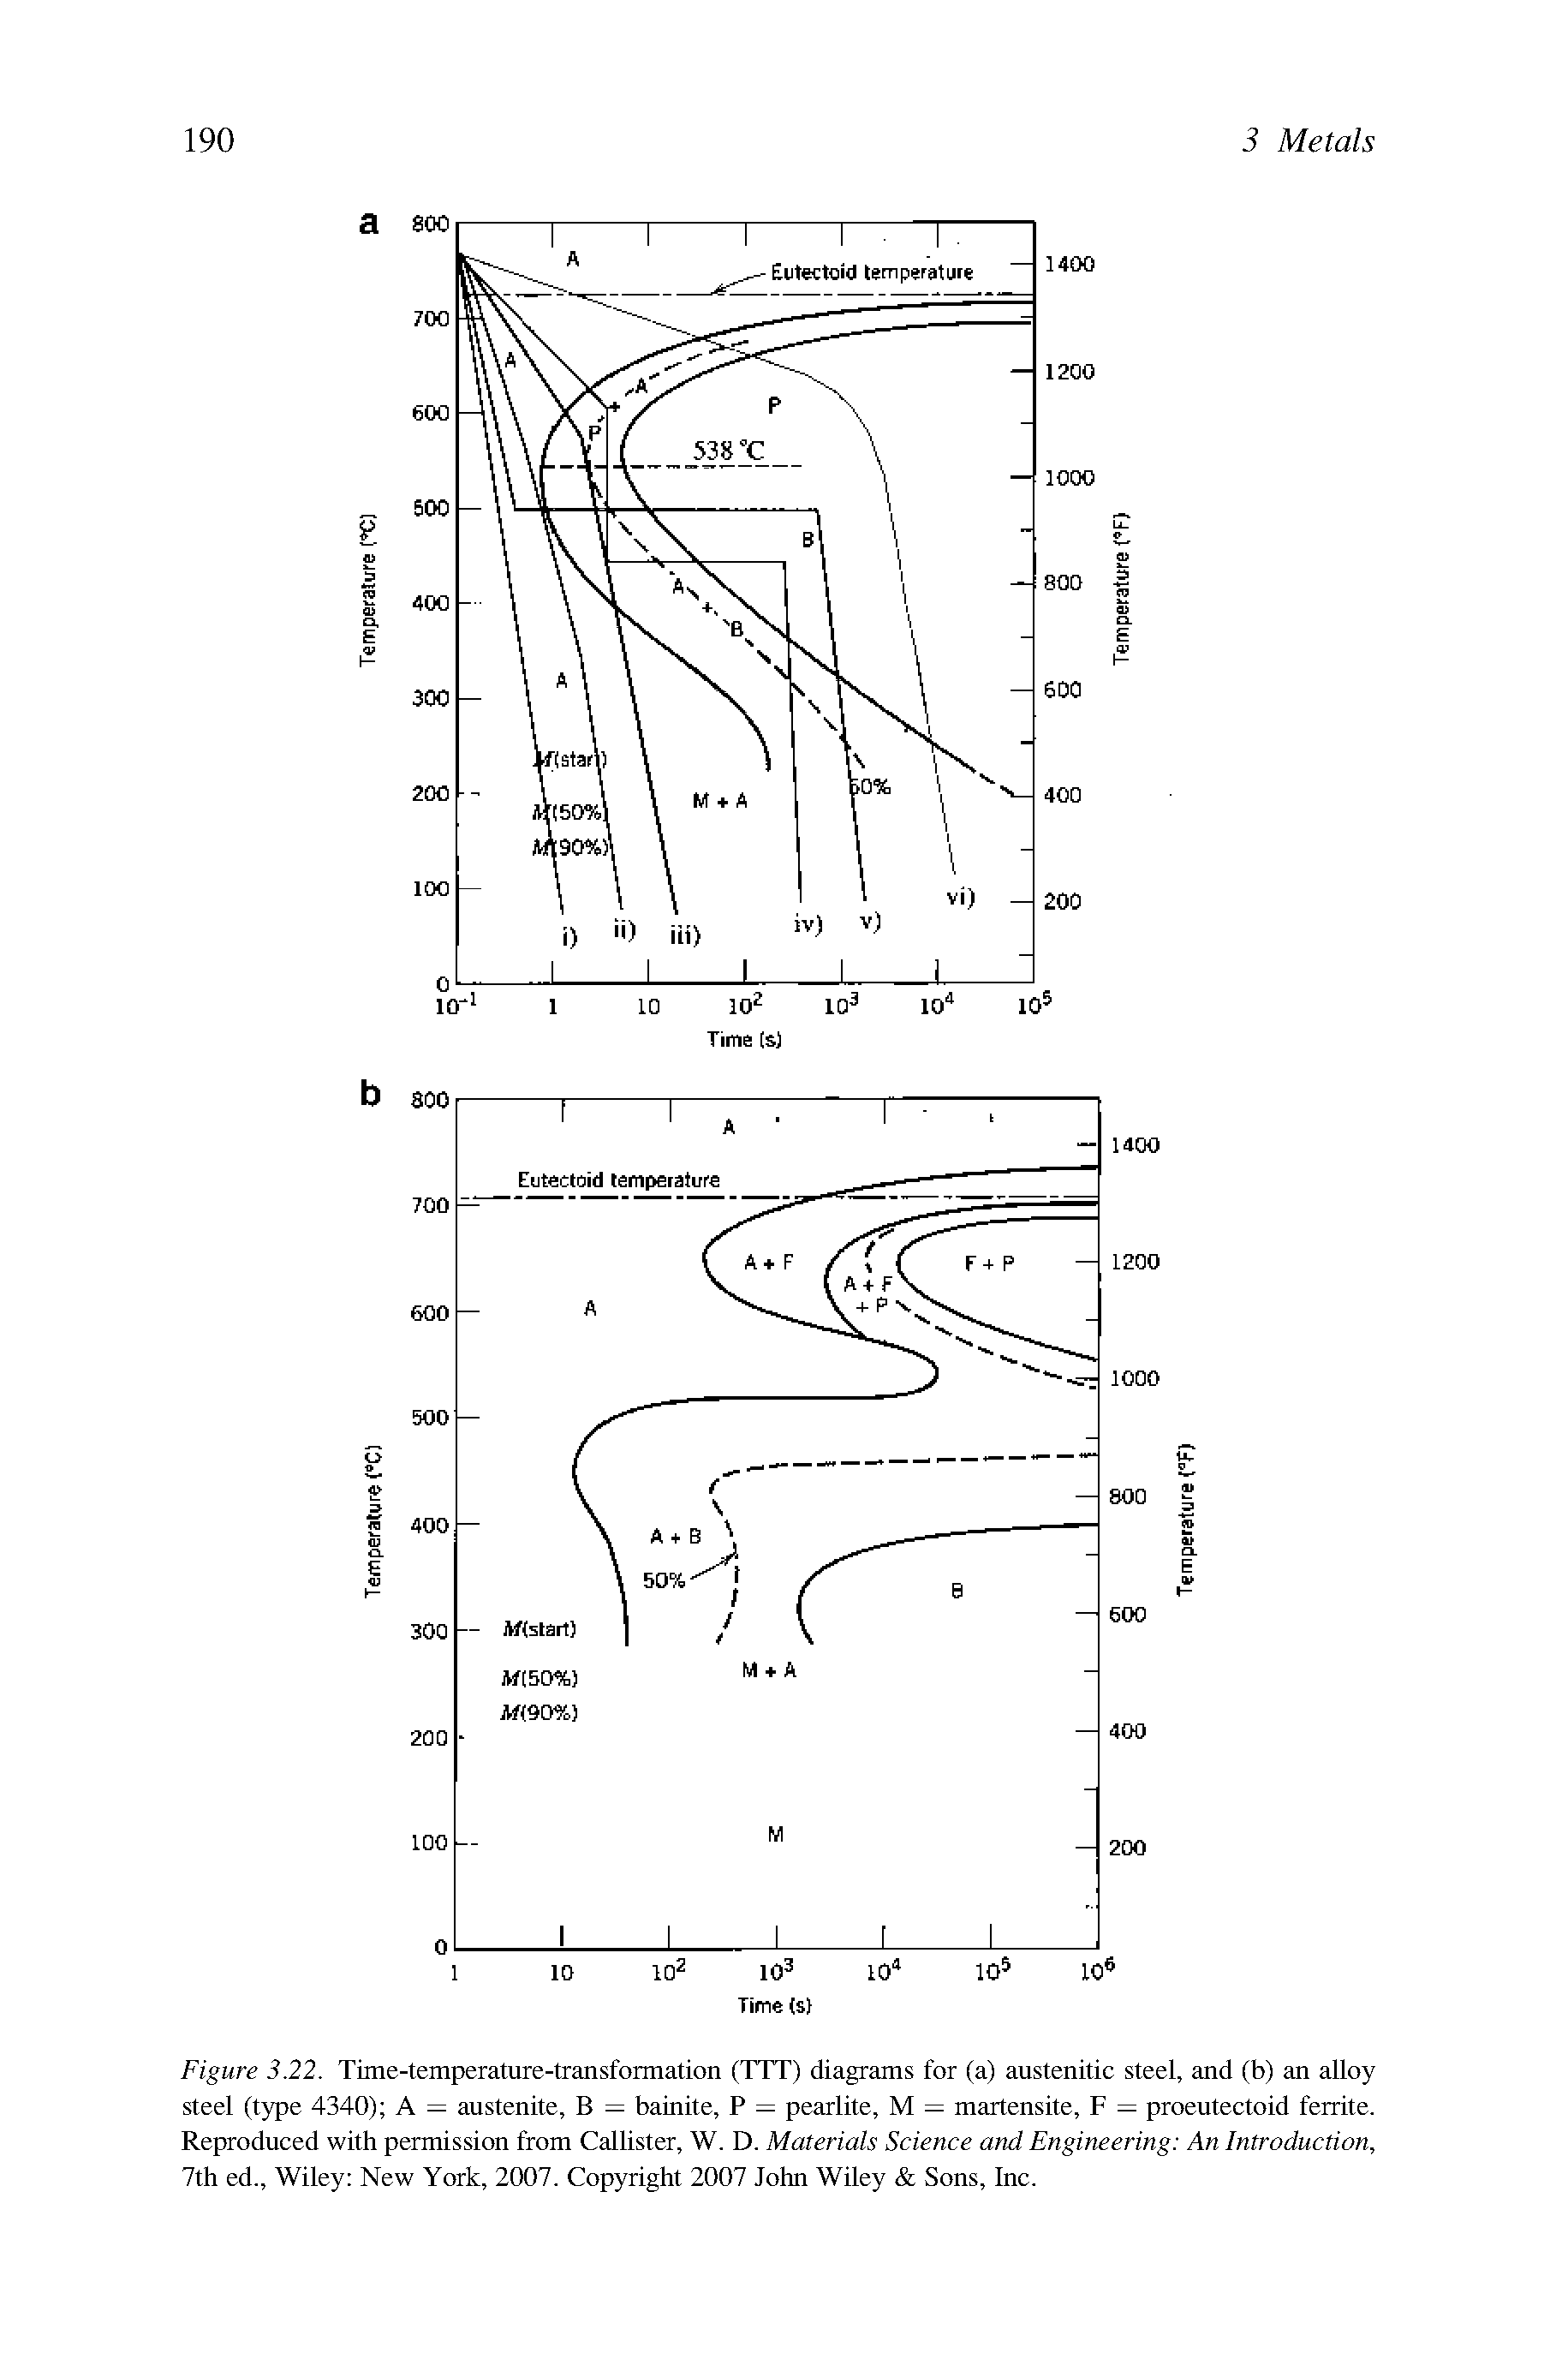 Figure 3.22. Time-temperature-transformation (TTT) diagrams for (a) austenitic steel, and (b) an alloy steel (type 4340) A = austenite, B = bainite, P = pearlite, M = martensite, F = proeutectoid ferrite. Reproduced with permission from Callister, W. D. Materials Science and Engineering An Introduction, 7th ed., Wiley New York, 2007. Copyright 2007 John Wiley Sons, Inc.